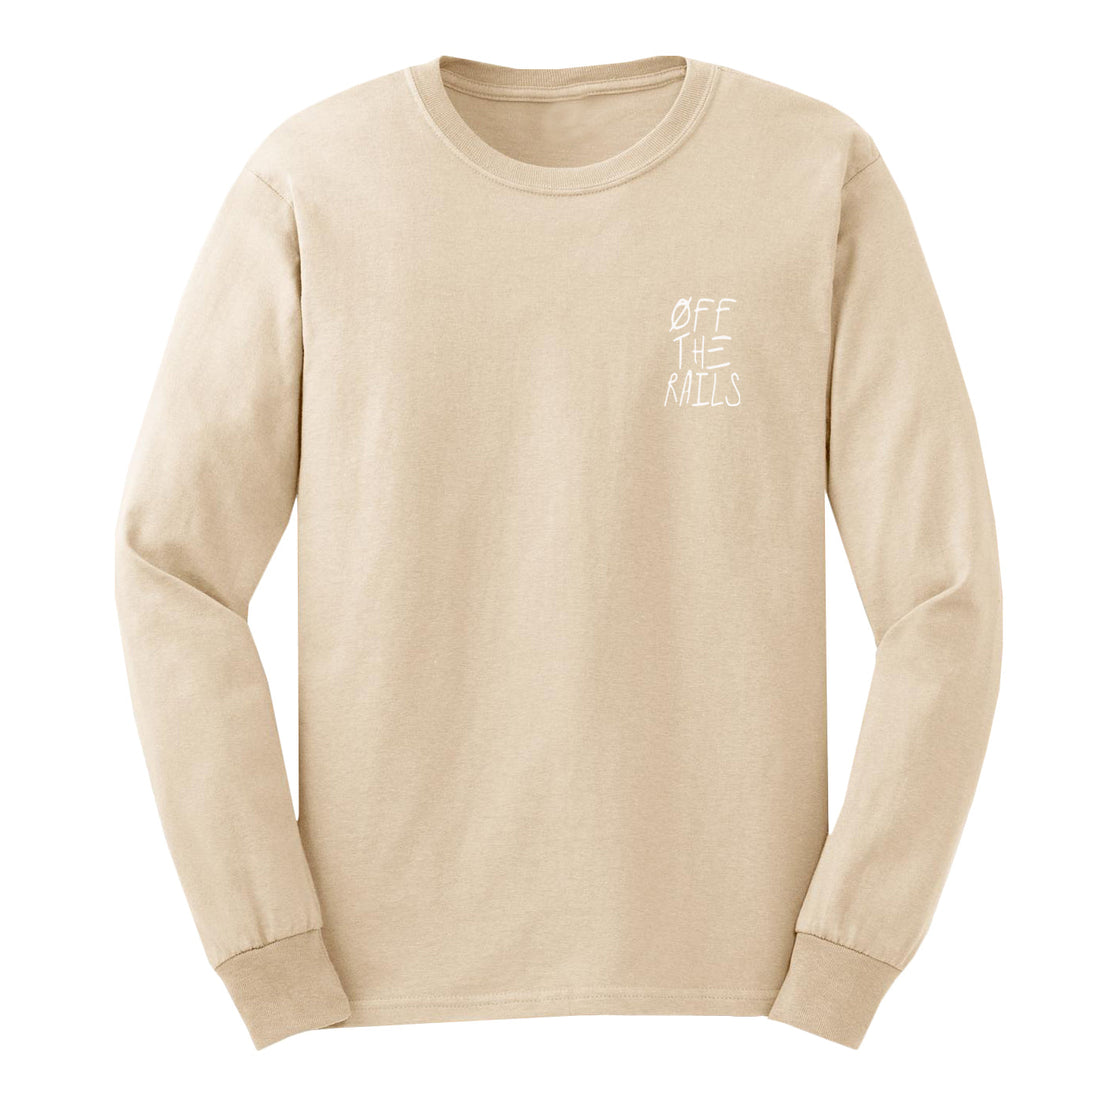 JJ Wilde - Off The Rails - Natural Long Sleeve